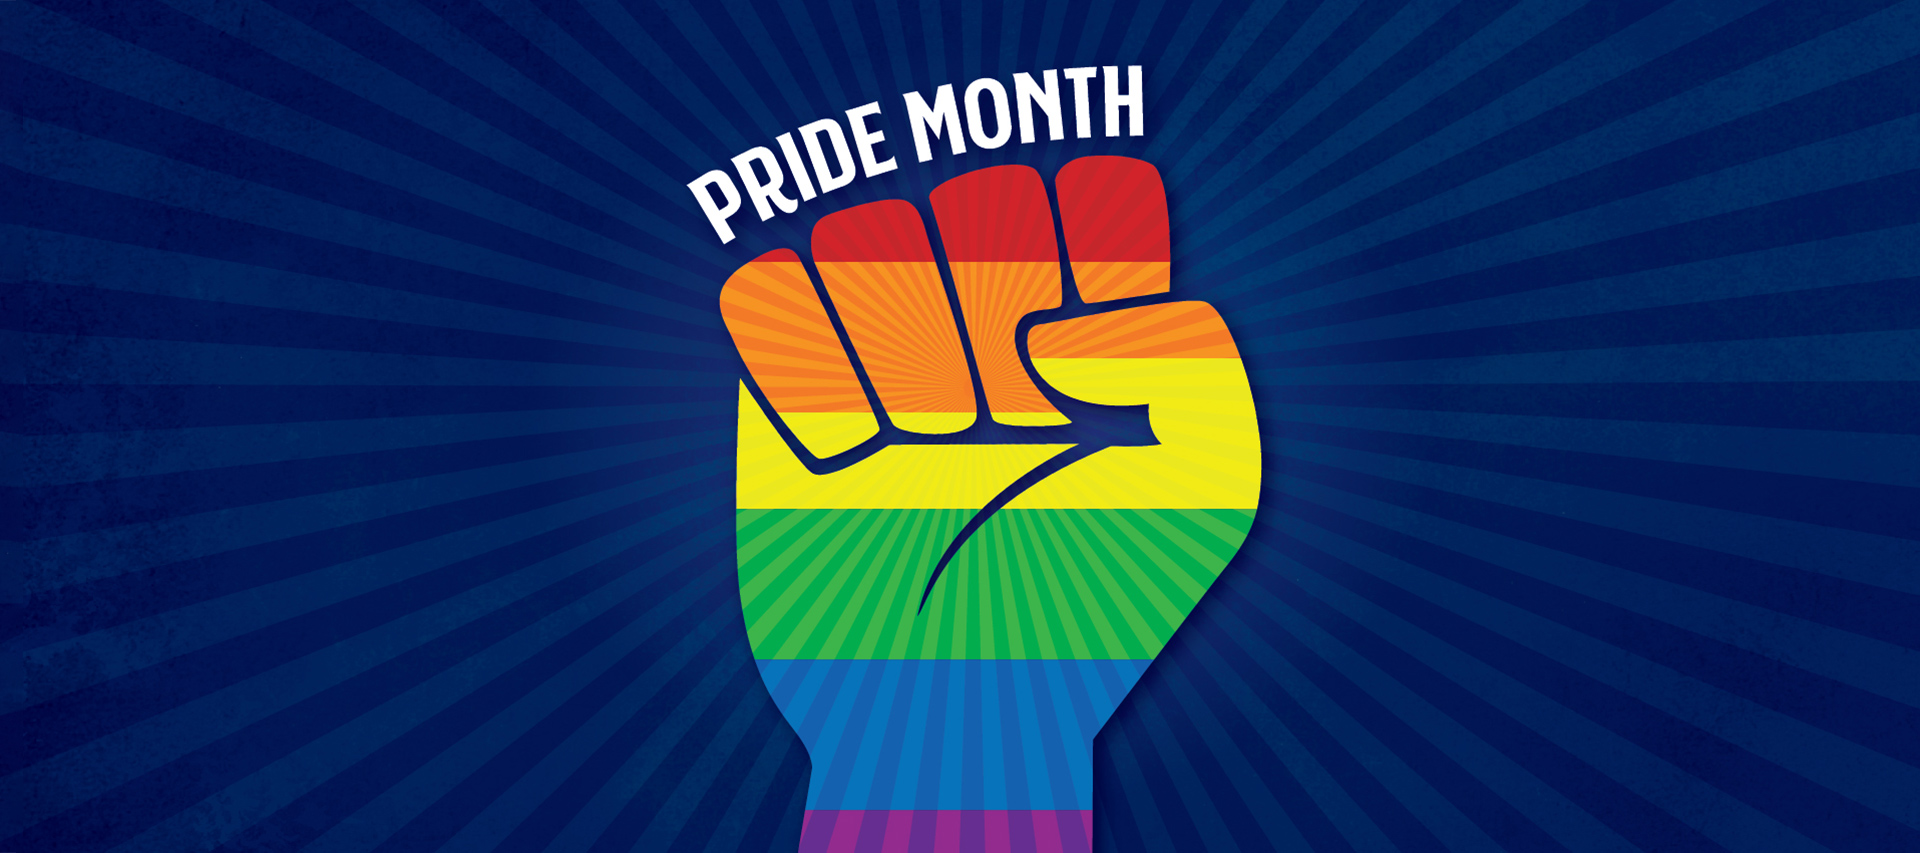 Rainbow-colored fist with a blue background. Text: Pride Month